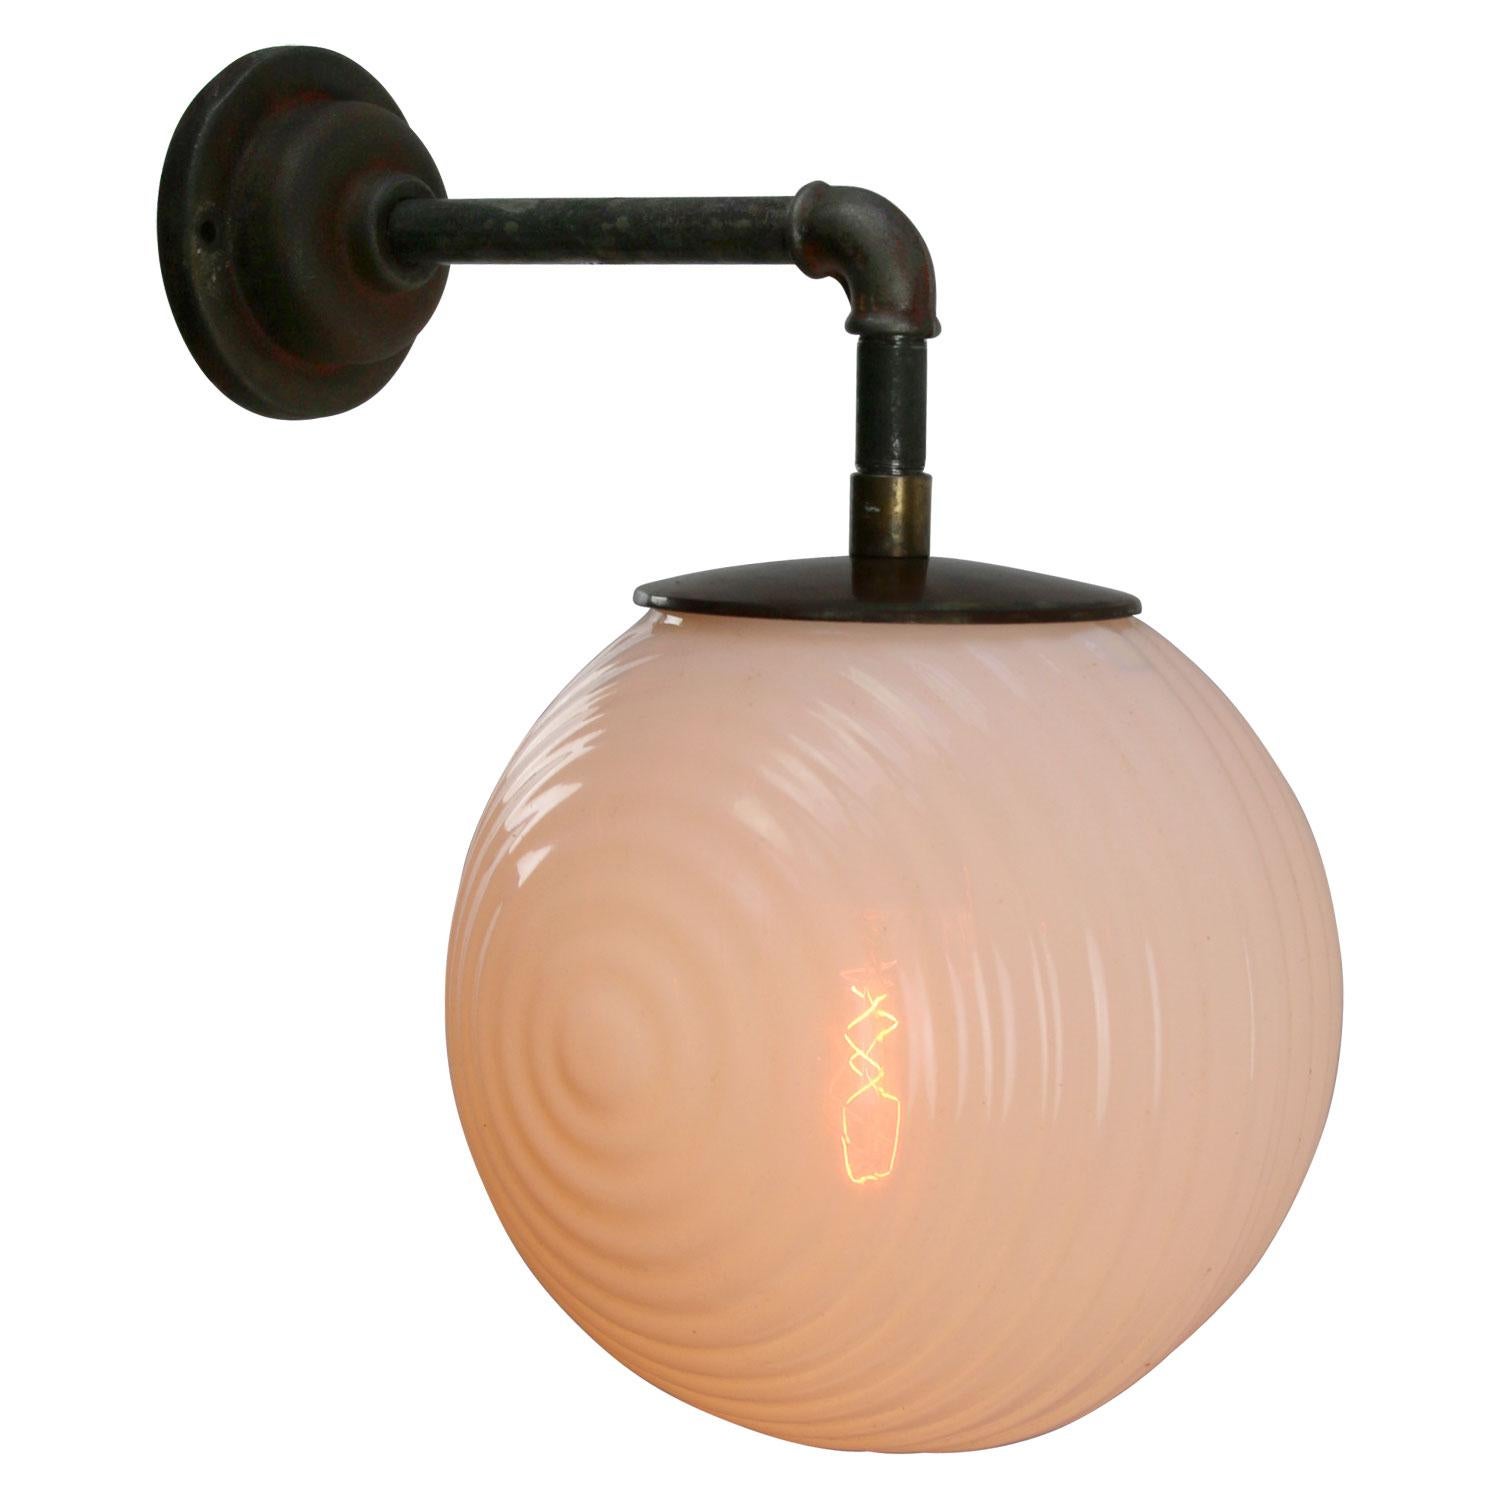 Opaline glass industrial wall light.
Brass top.

Diameter cast iron wall piece: 10.5 cm / 4”, 2 holes to secure

Weight: 4.80 kg / 10.6 lb

Priced per individual item. All lamps have been made suitable by international standards for incandescent